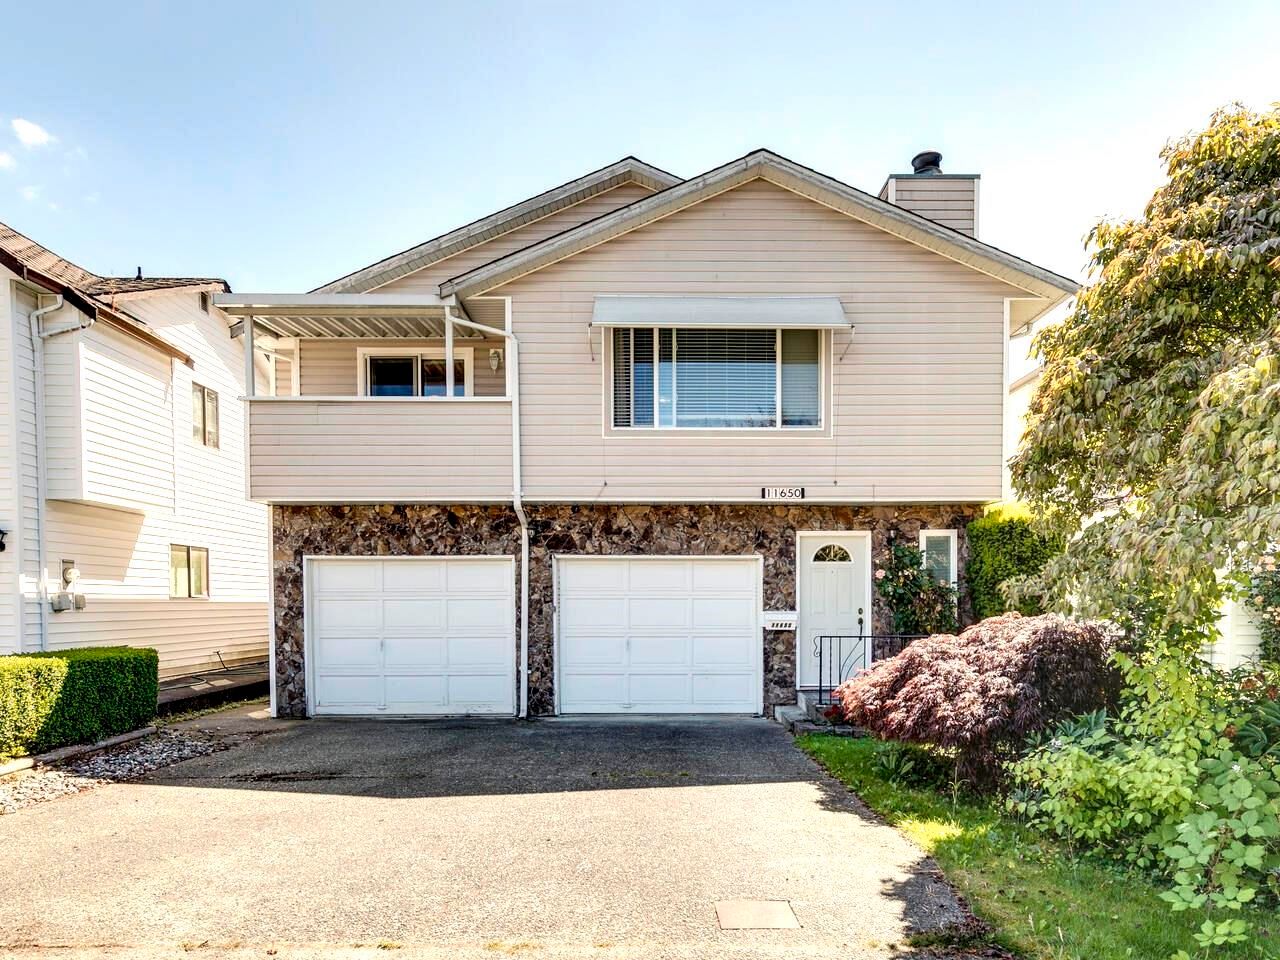 Open House on Saturday, August 6, 2022 1:00PM - 4:00PM
If you're buying and looking for a great home, this is a home YOU MUST SEE.  You're going to be very glad you did.